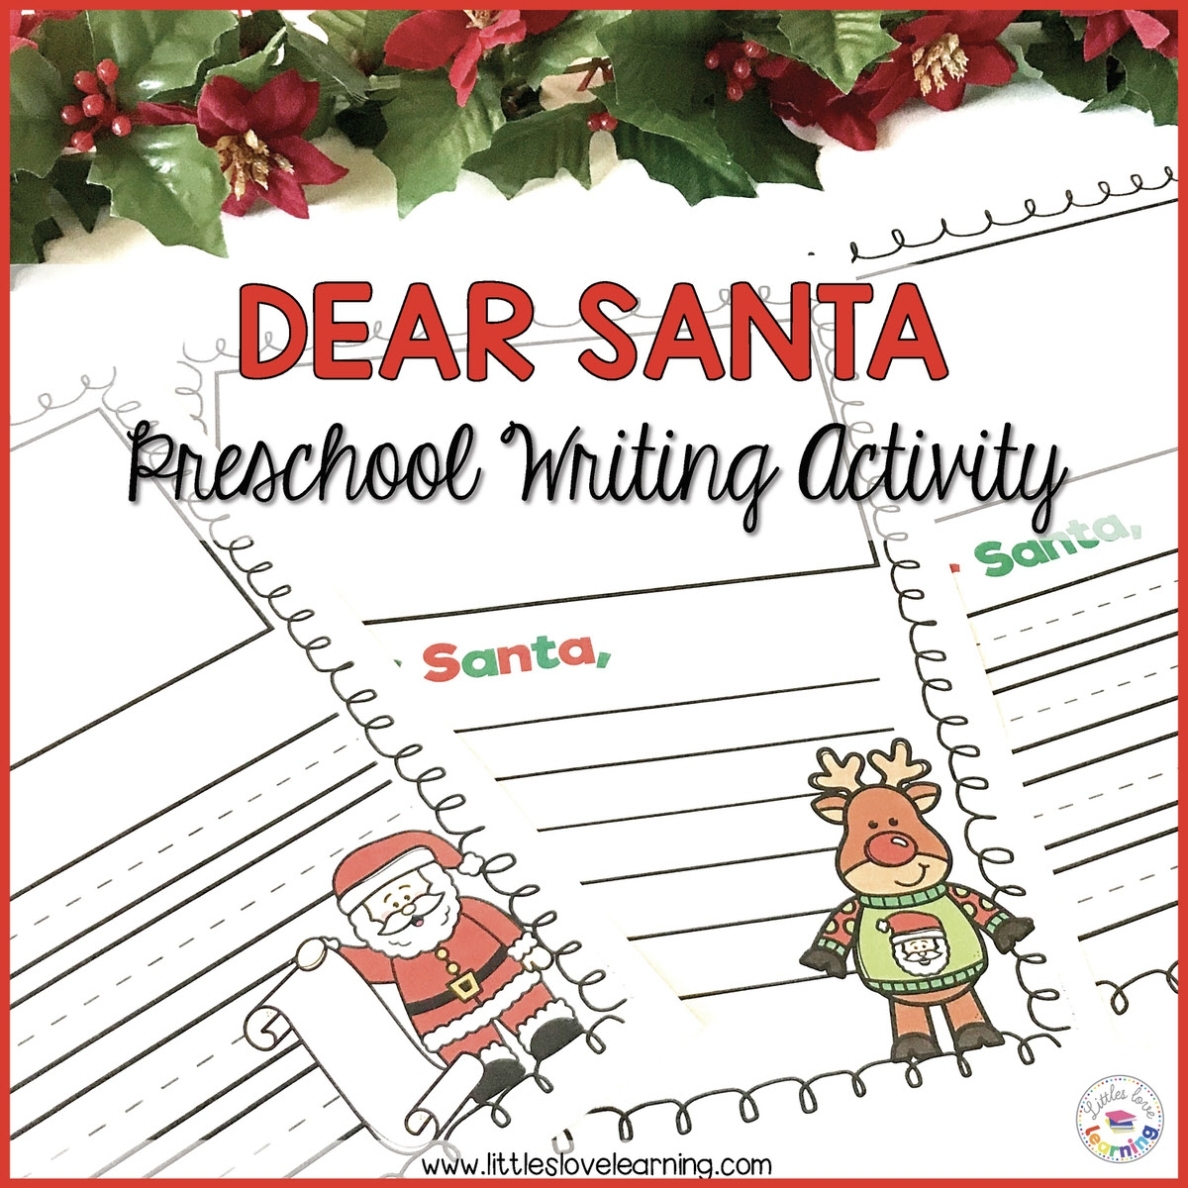 Free Dear Santa Letter Template (Printable) For Preschool & Kindergarten For Dear Santa Letter Template Free